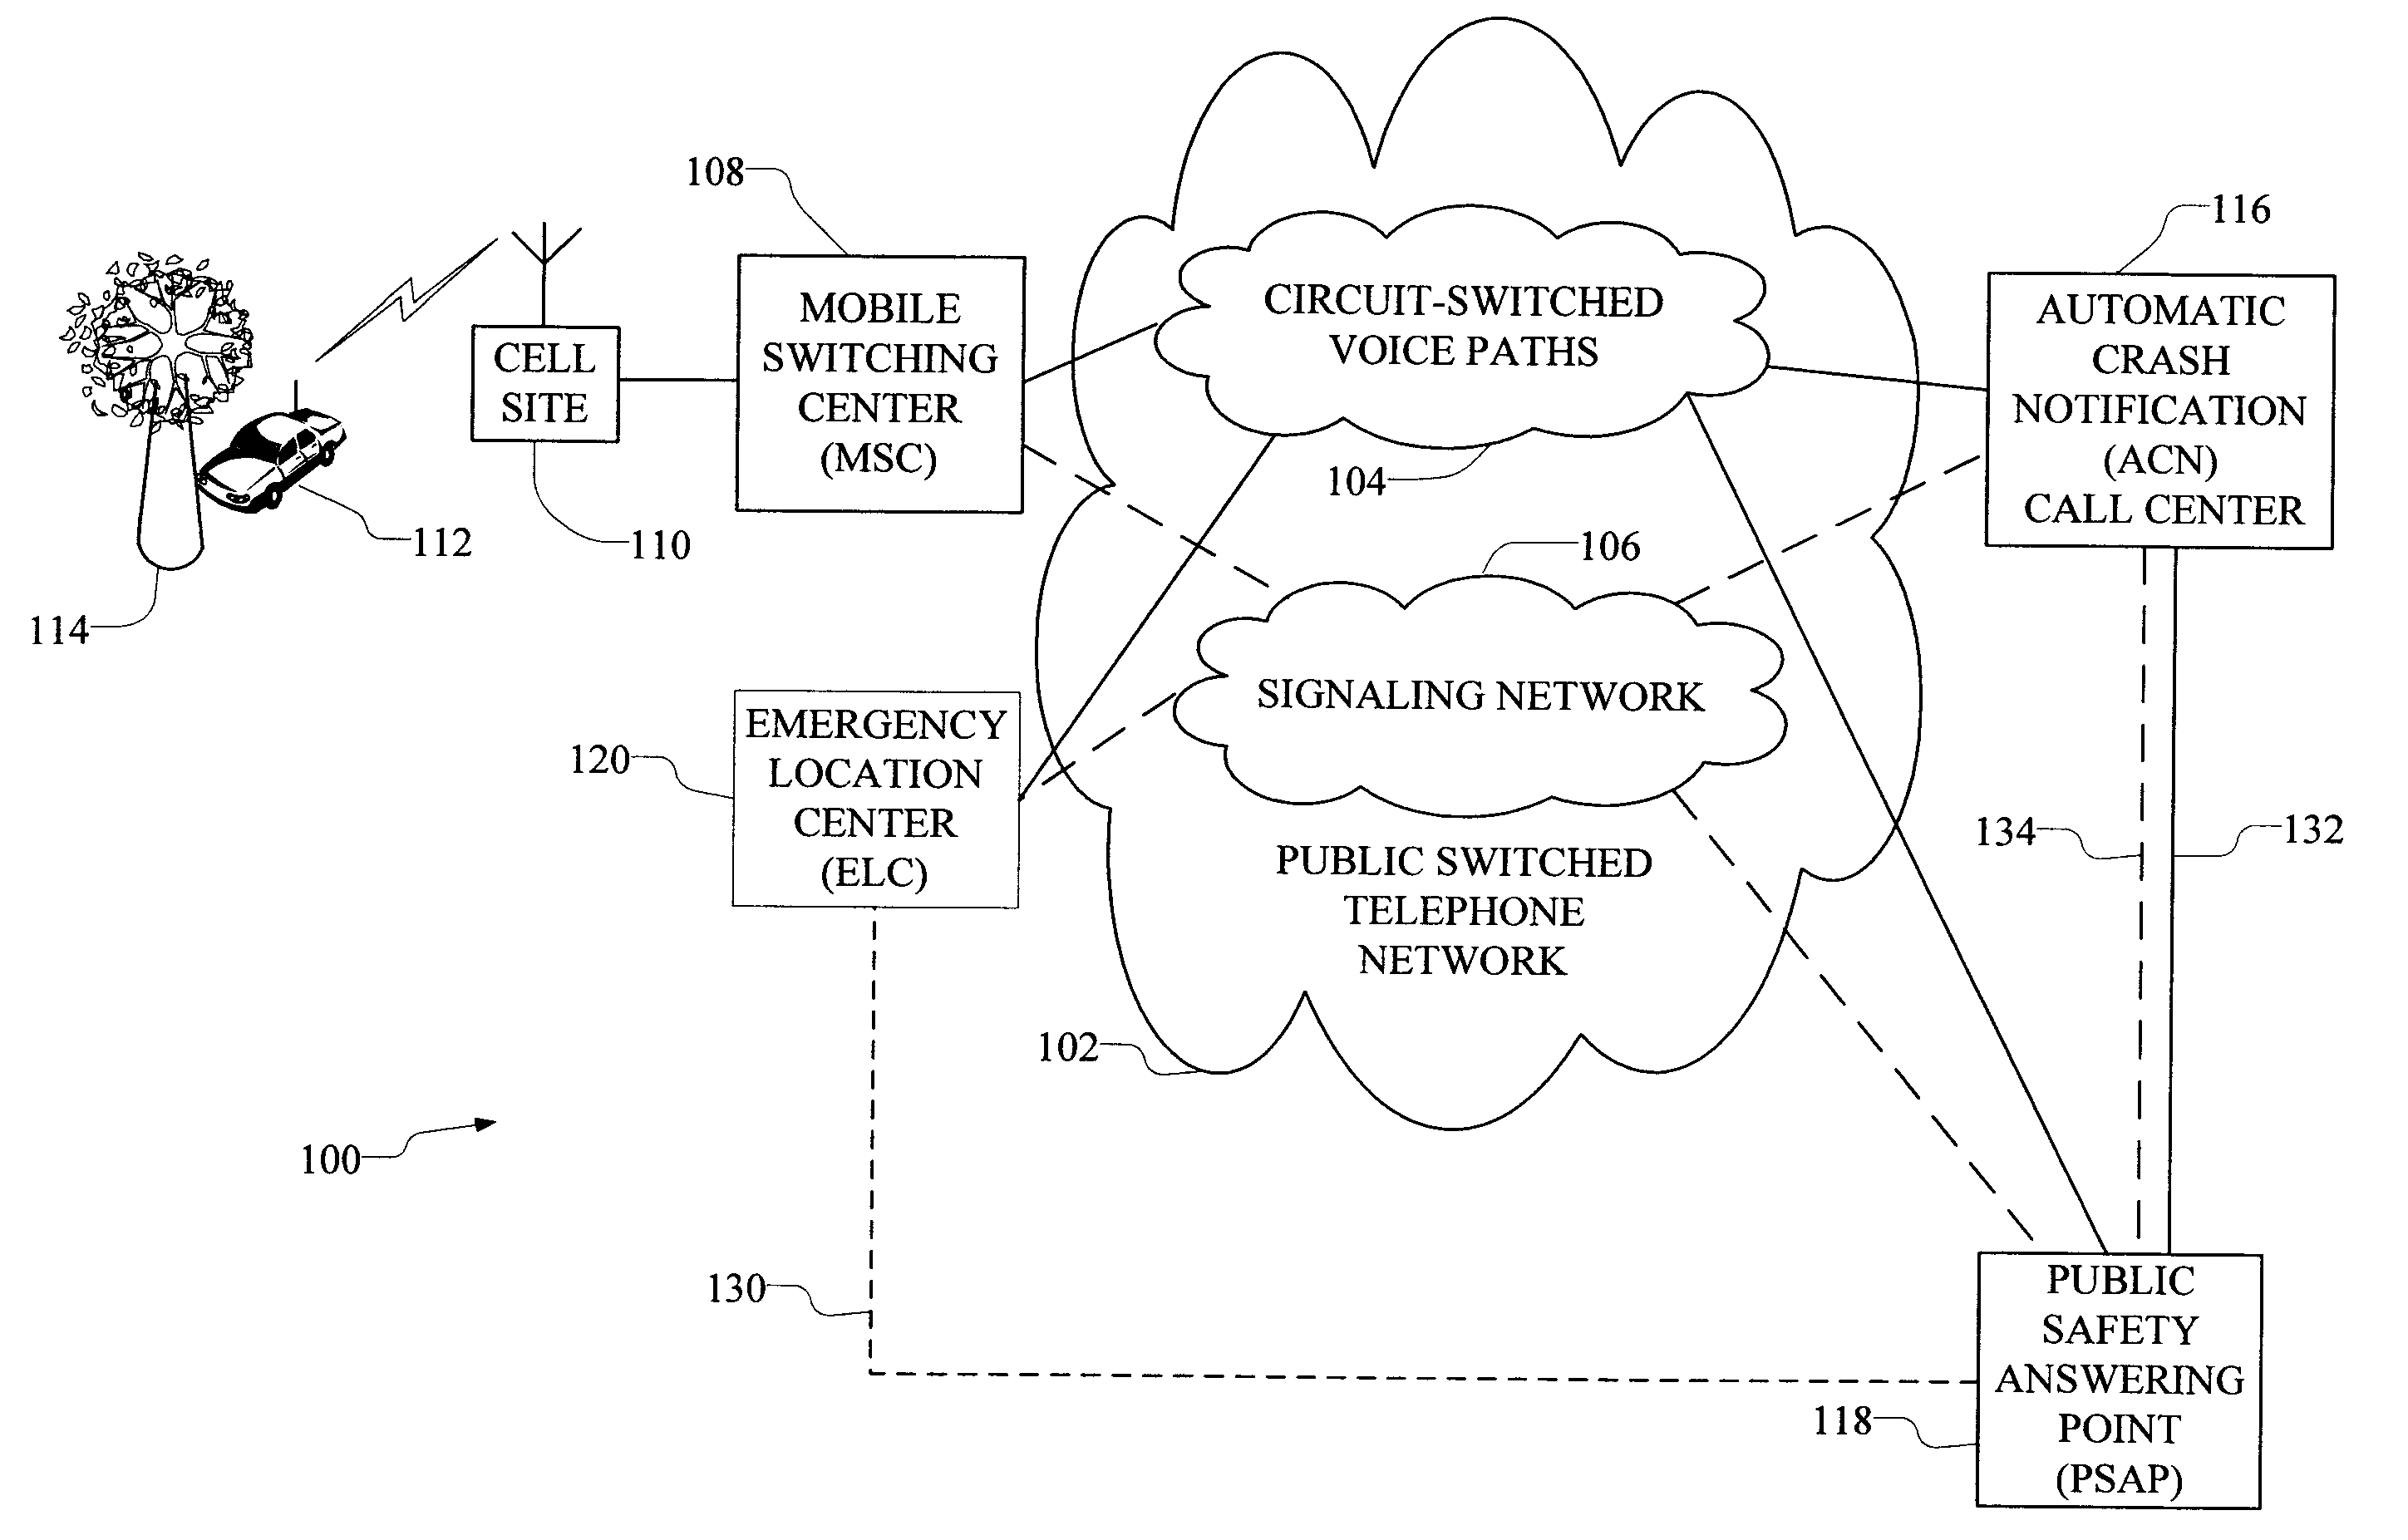 Automatic Routing of In-Vehicle Emergency Calls to Automatic Crash Notification Services and to Public Safety Answering Points